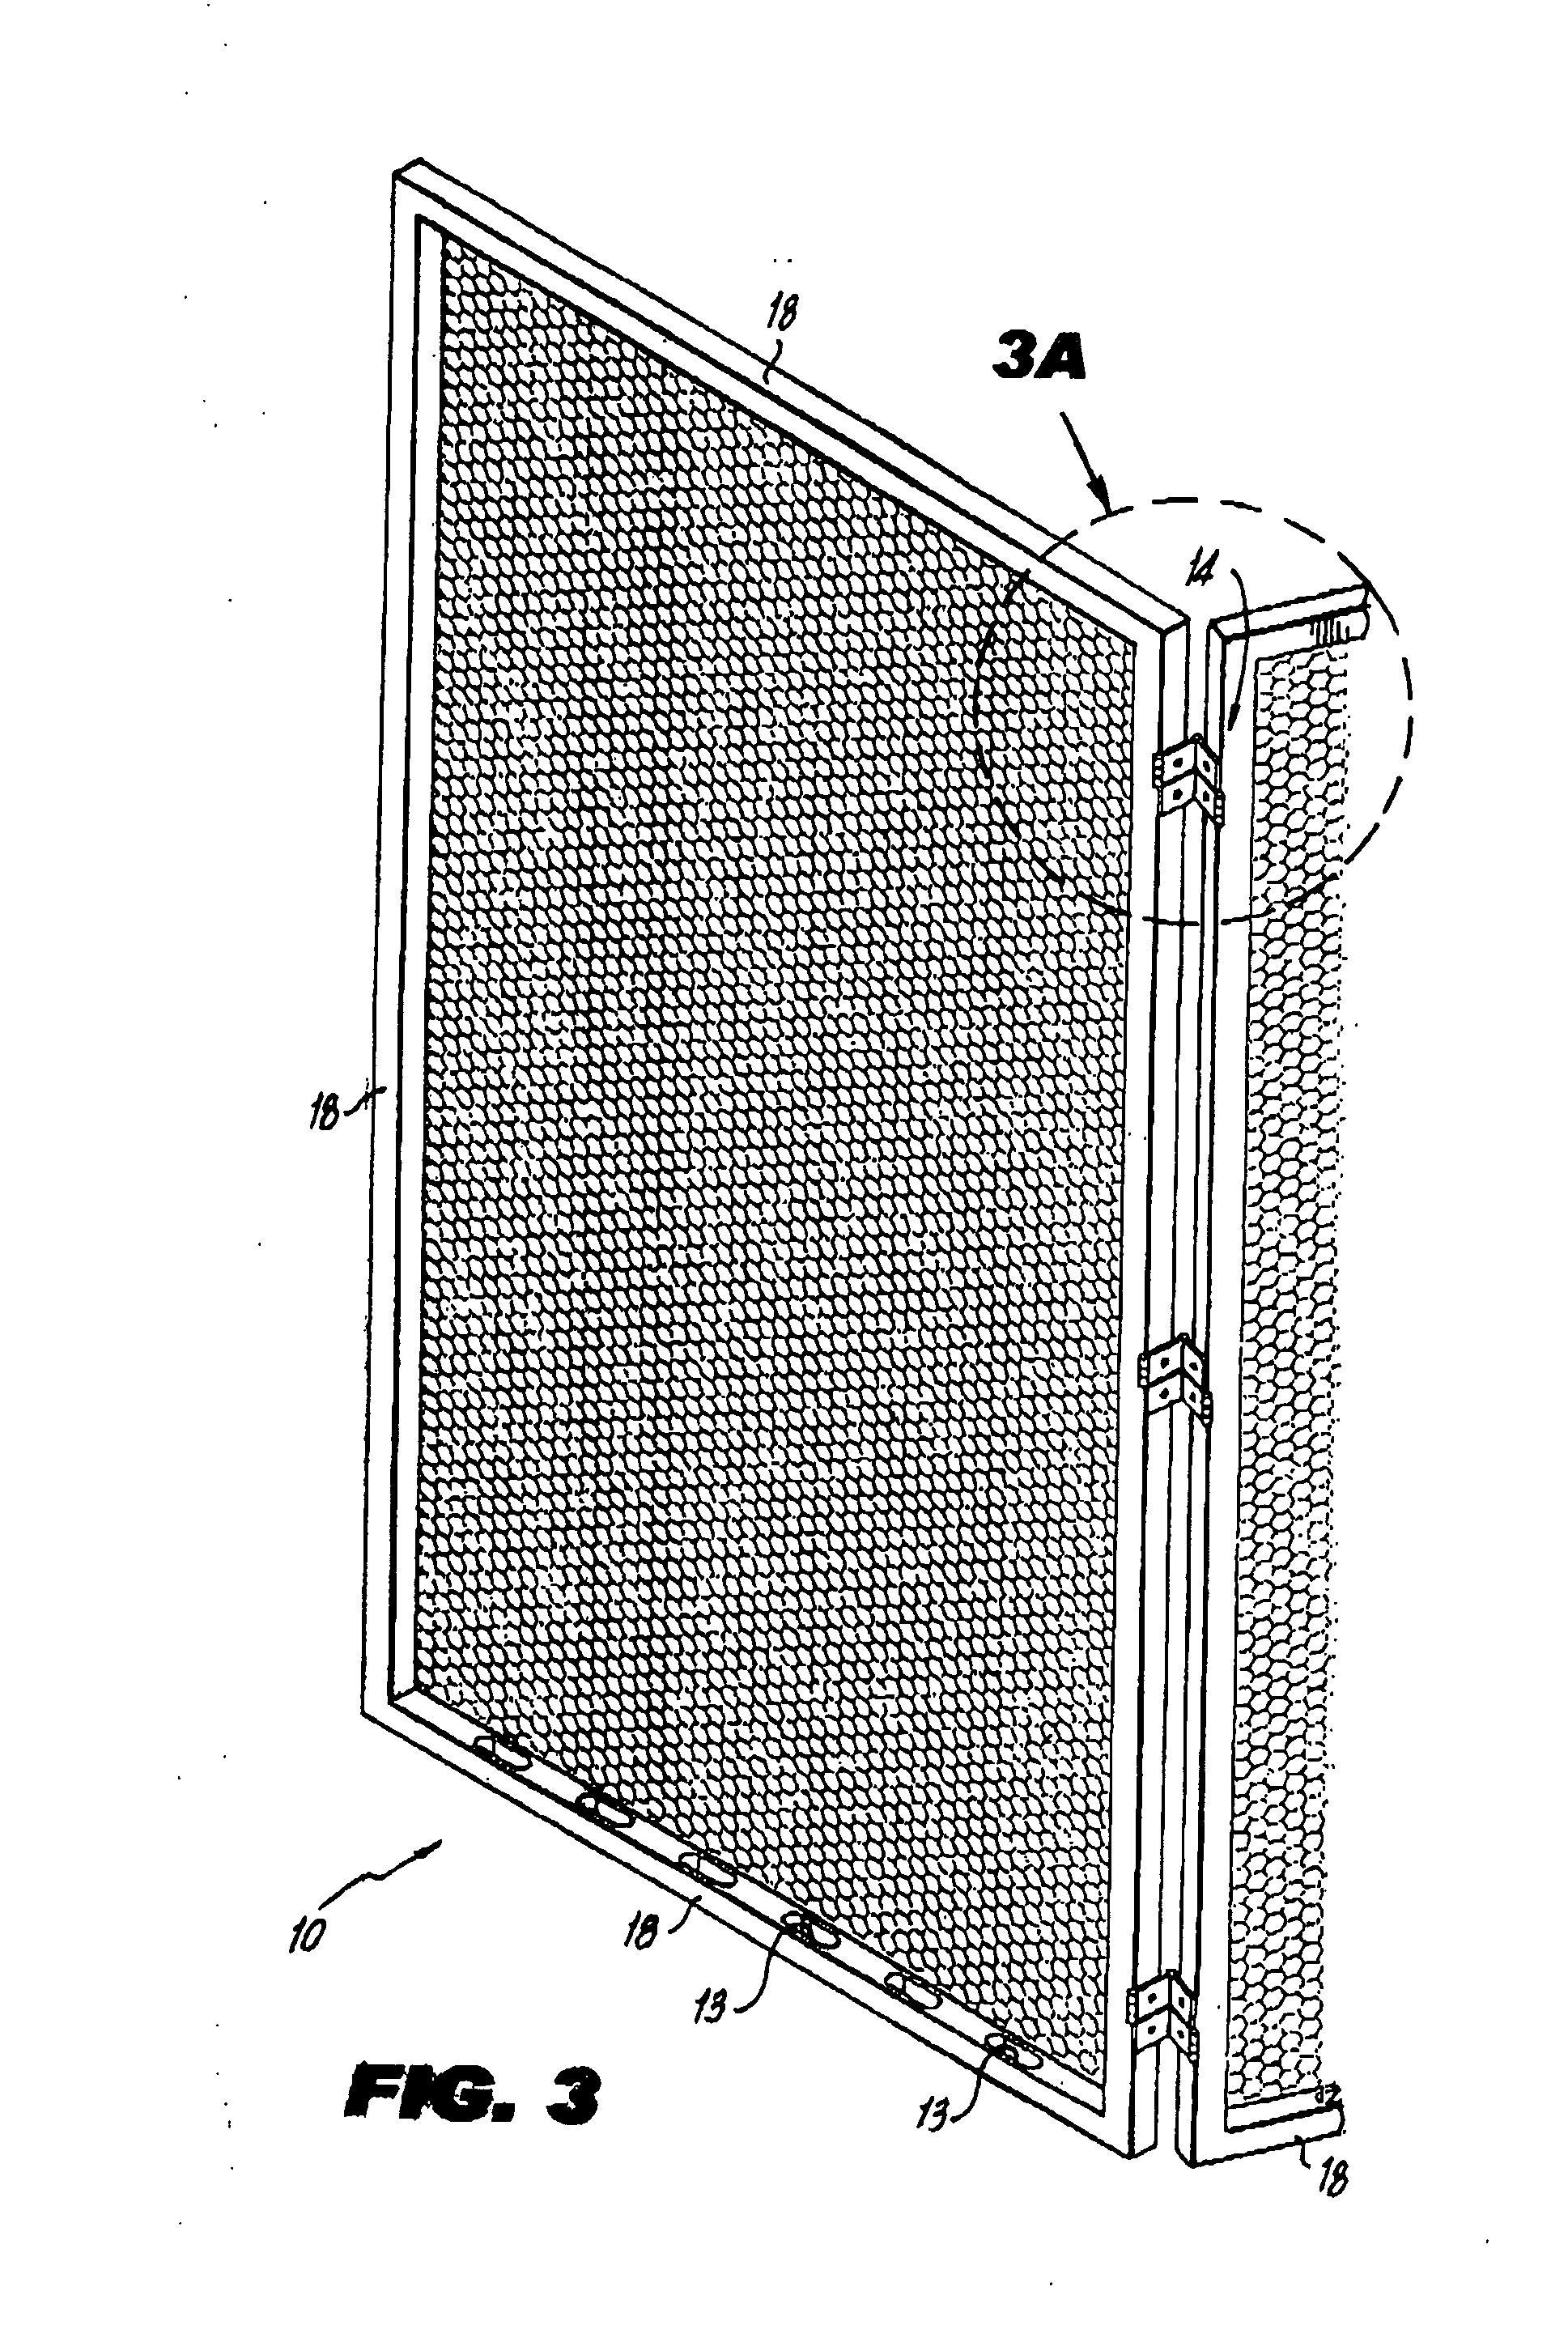 Method of retrofit installation of a portable swimming pool barrier fence